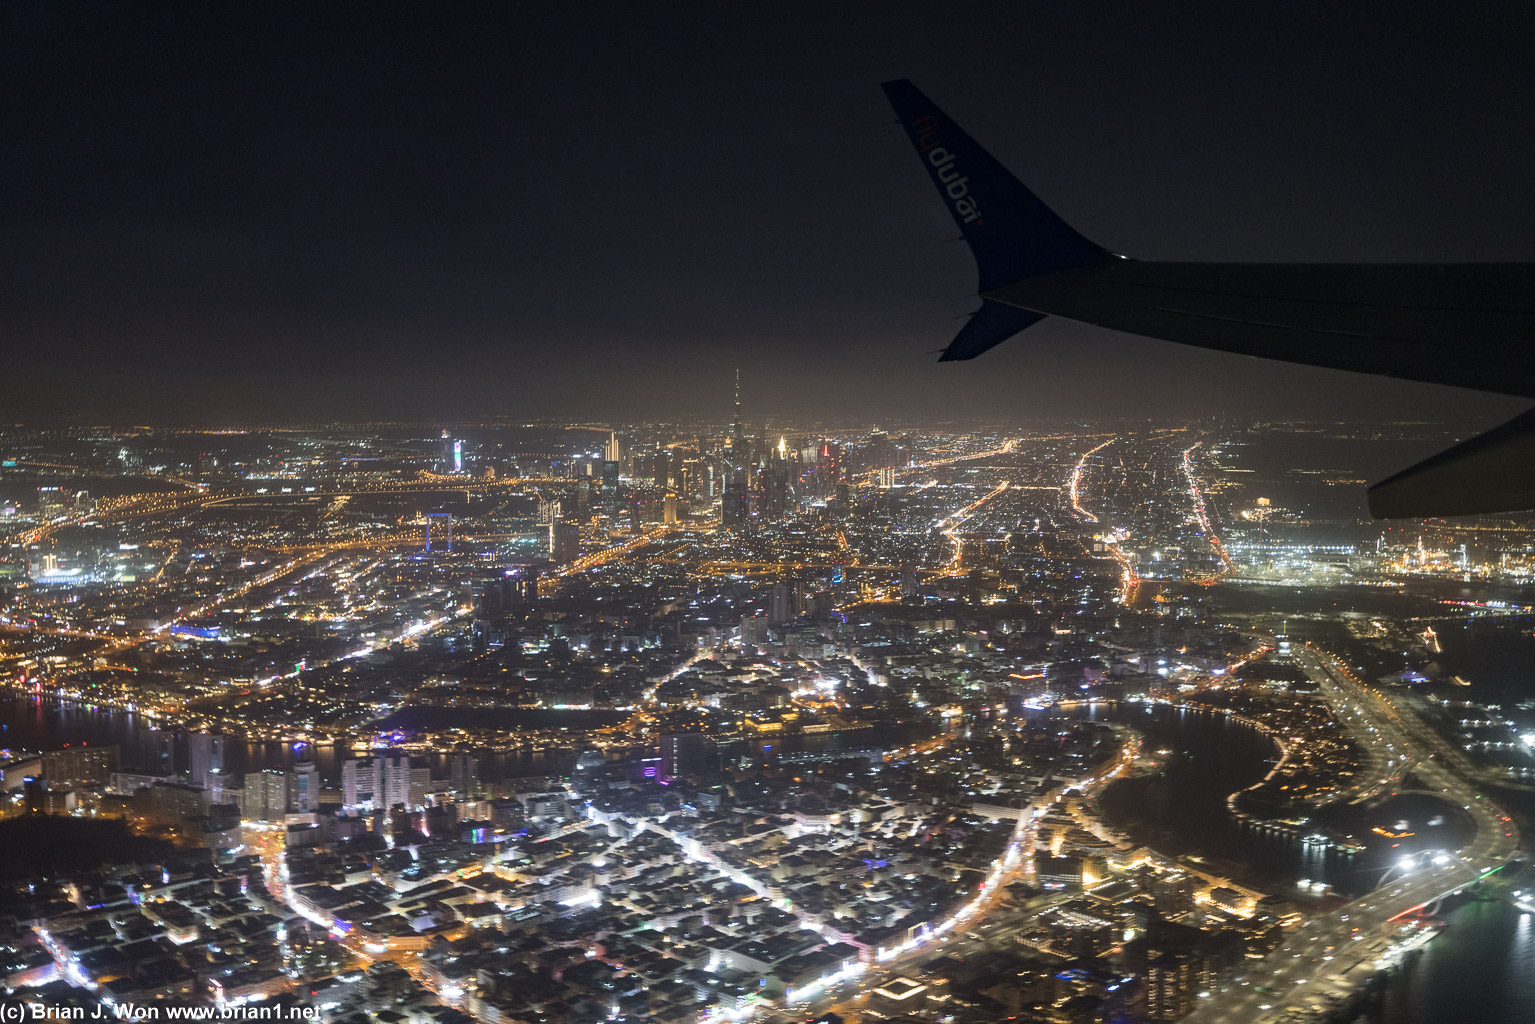 Central Dubai visible just after take-off.